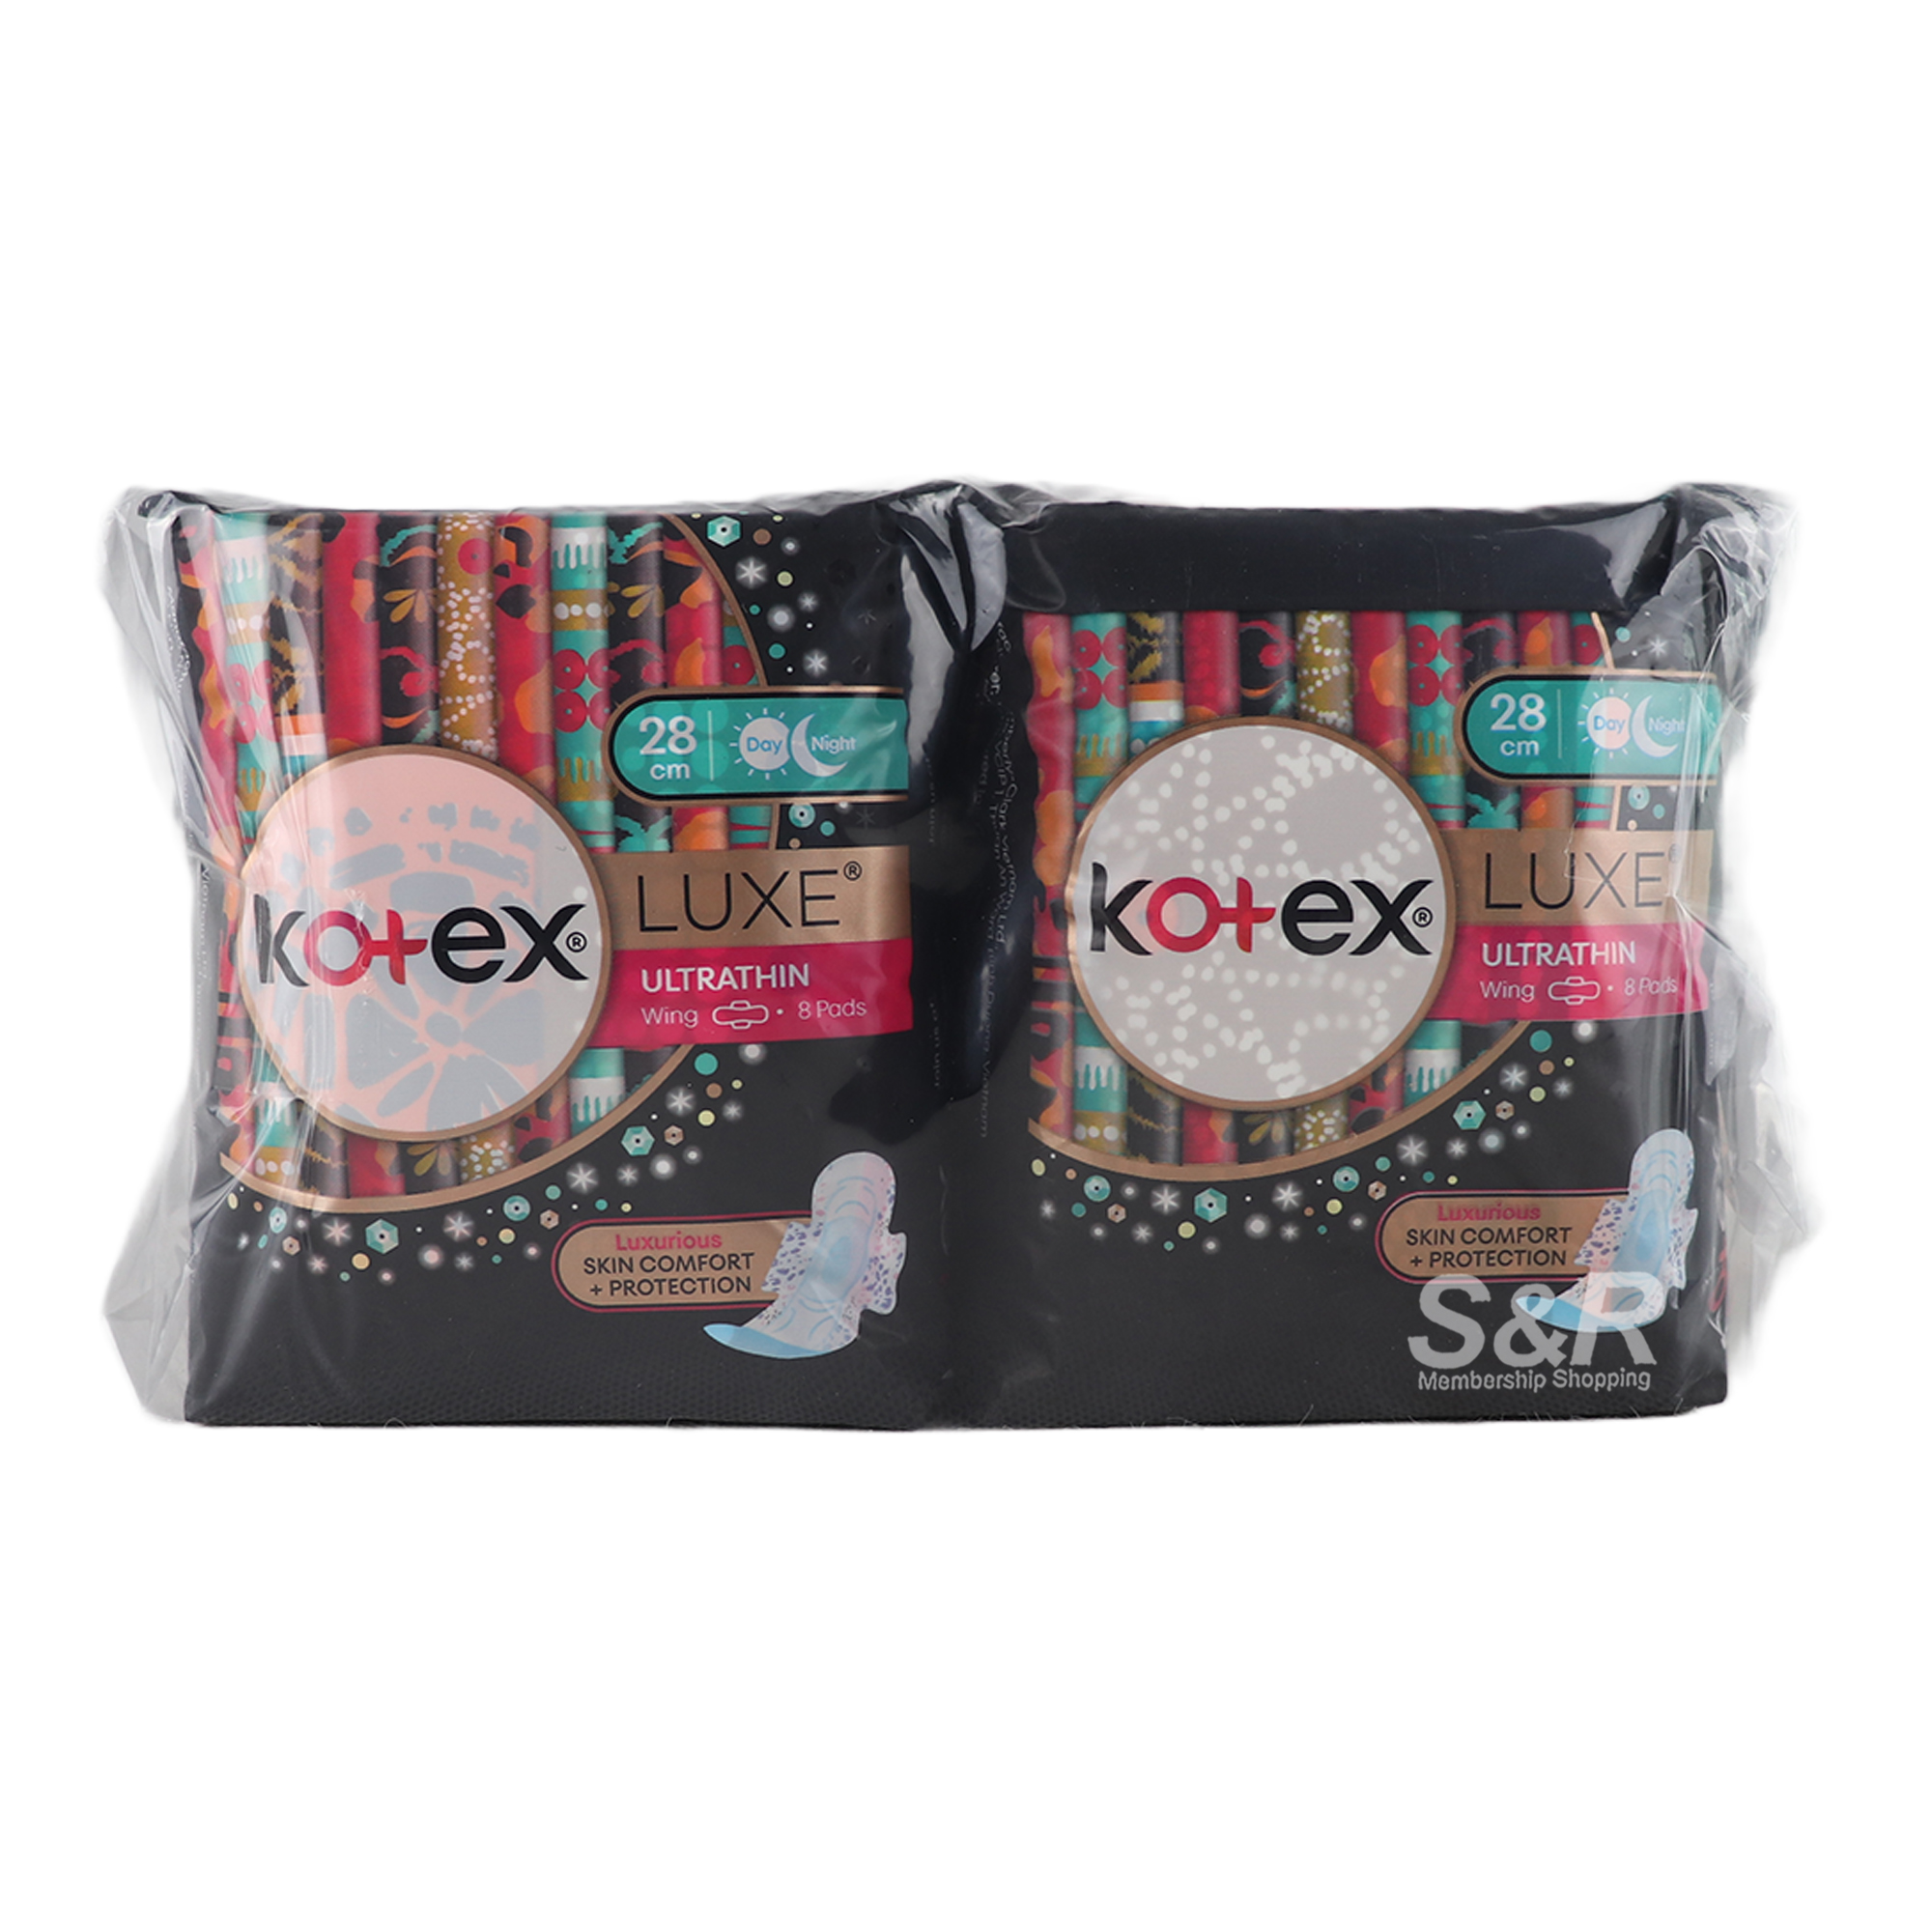 Kotex Luxe Ultrathin Wing 28cm Day and Night 4packs x 8pads